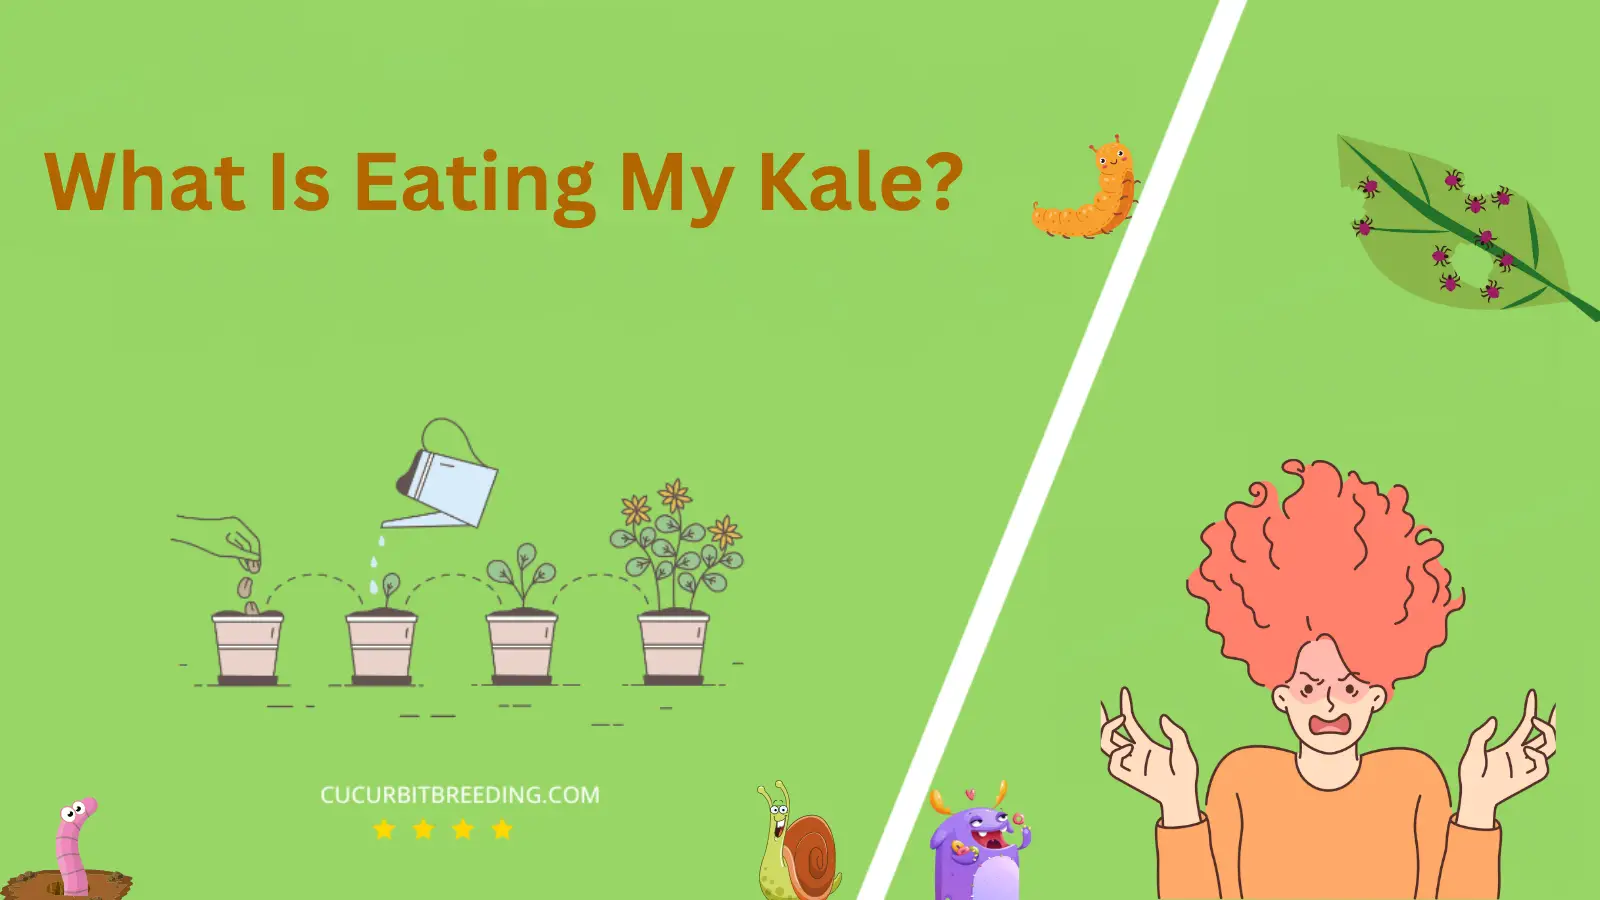 What Is Eating My Kale